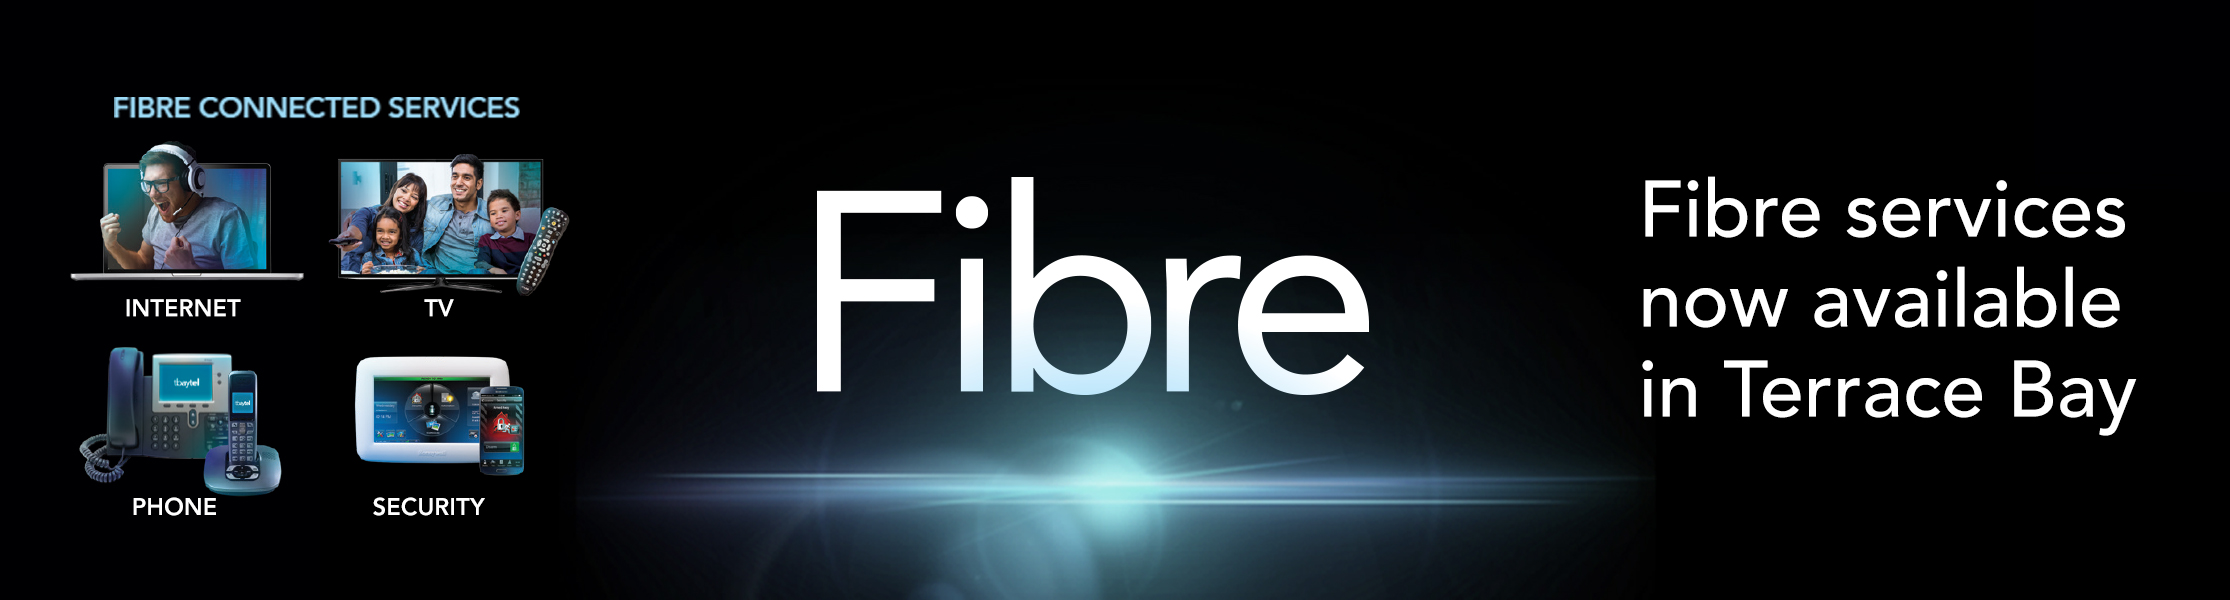 Fibre is now available in Terrace Bay